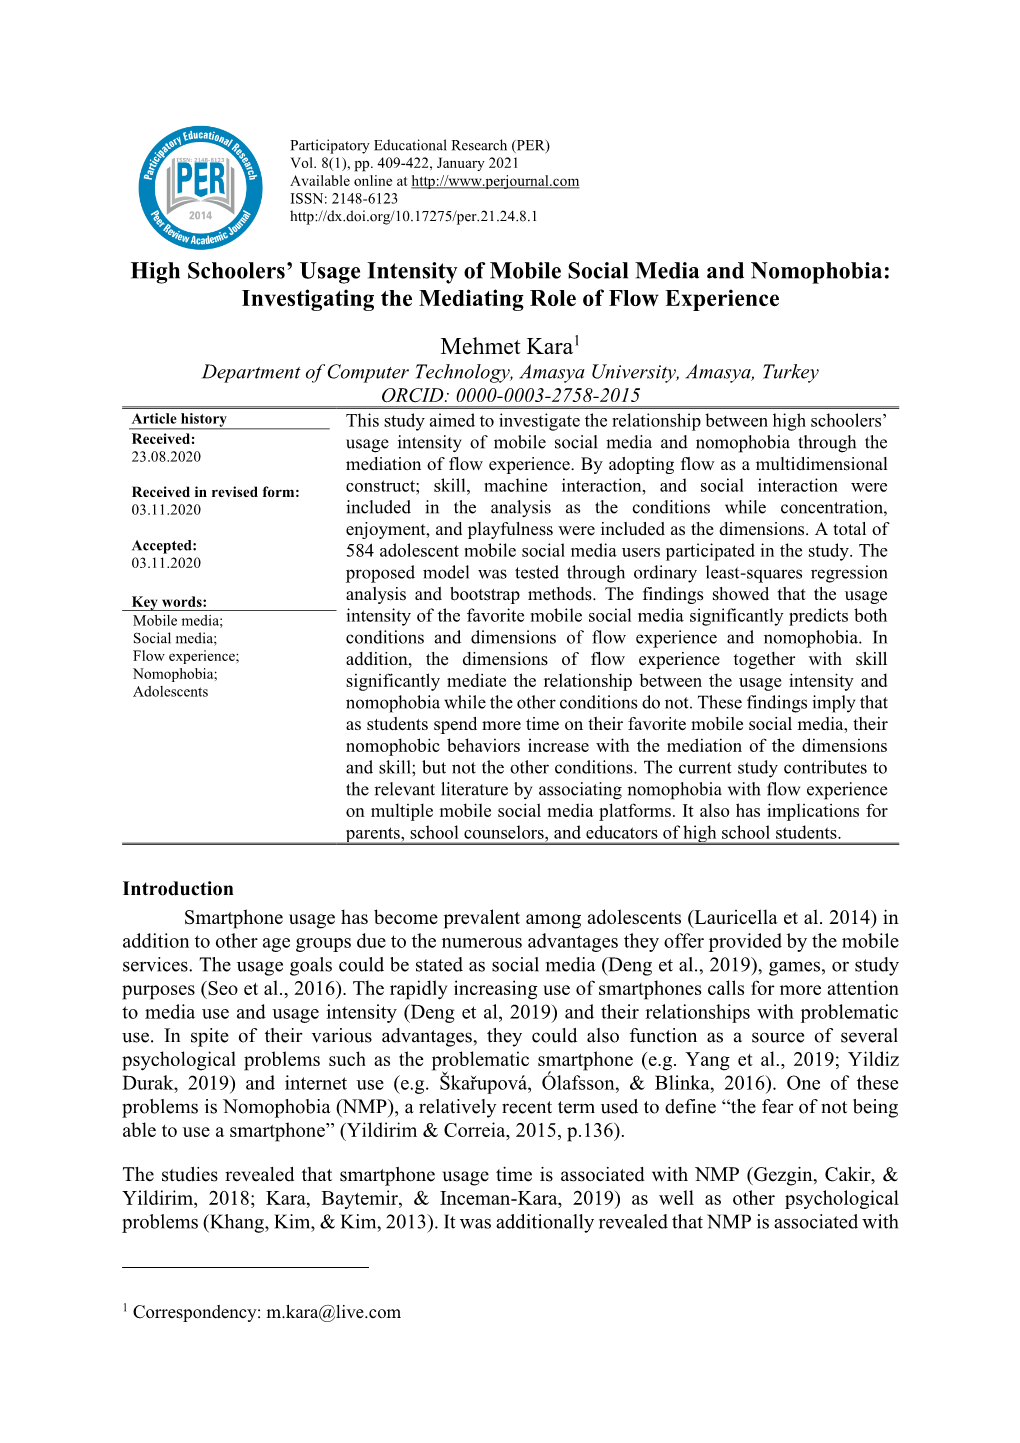 High Schoolers' Usage Intensity of Mobile Social Media and Nomophobia: Investigating the Mediating Role of Flow Experience